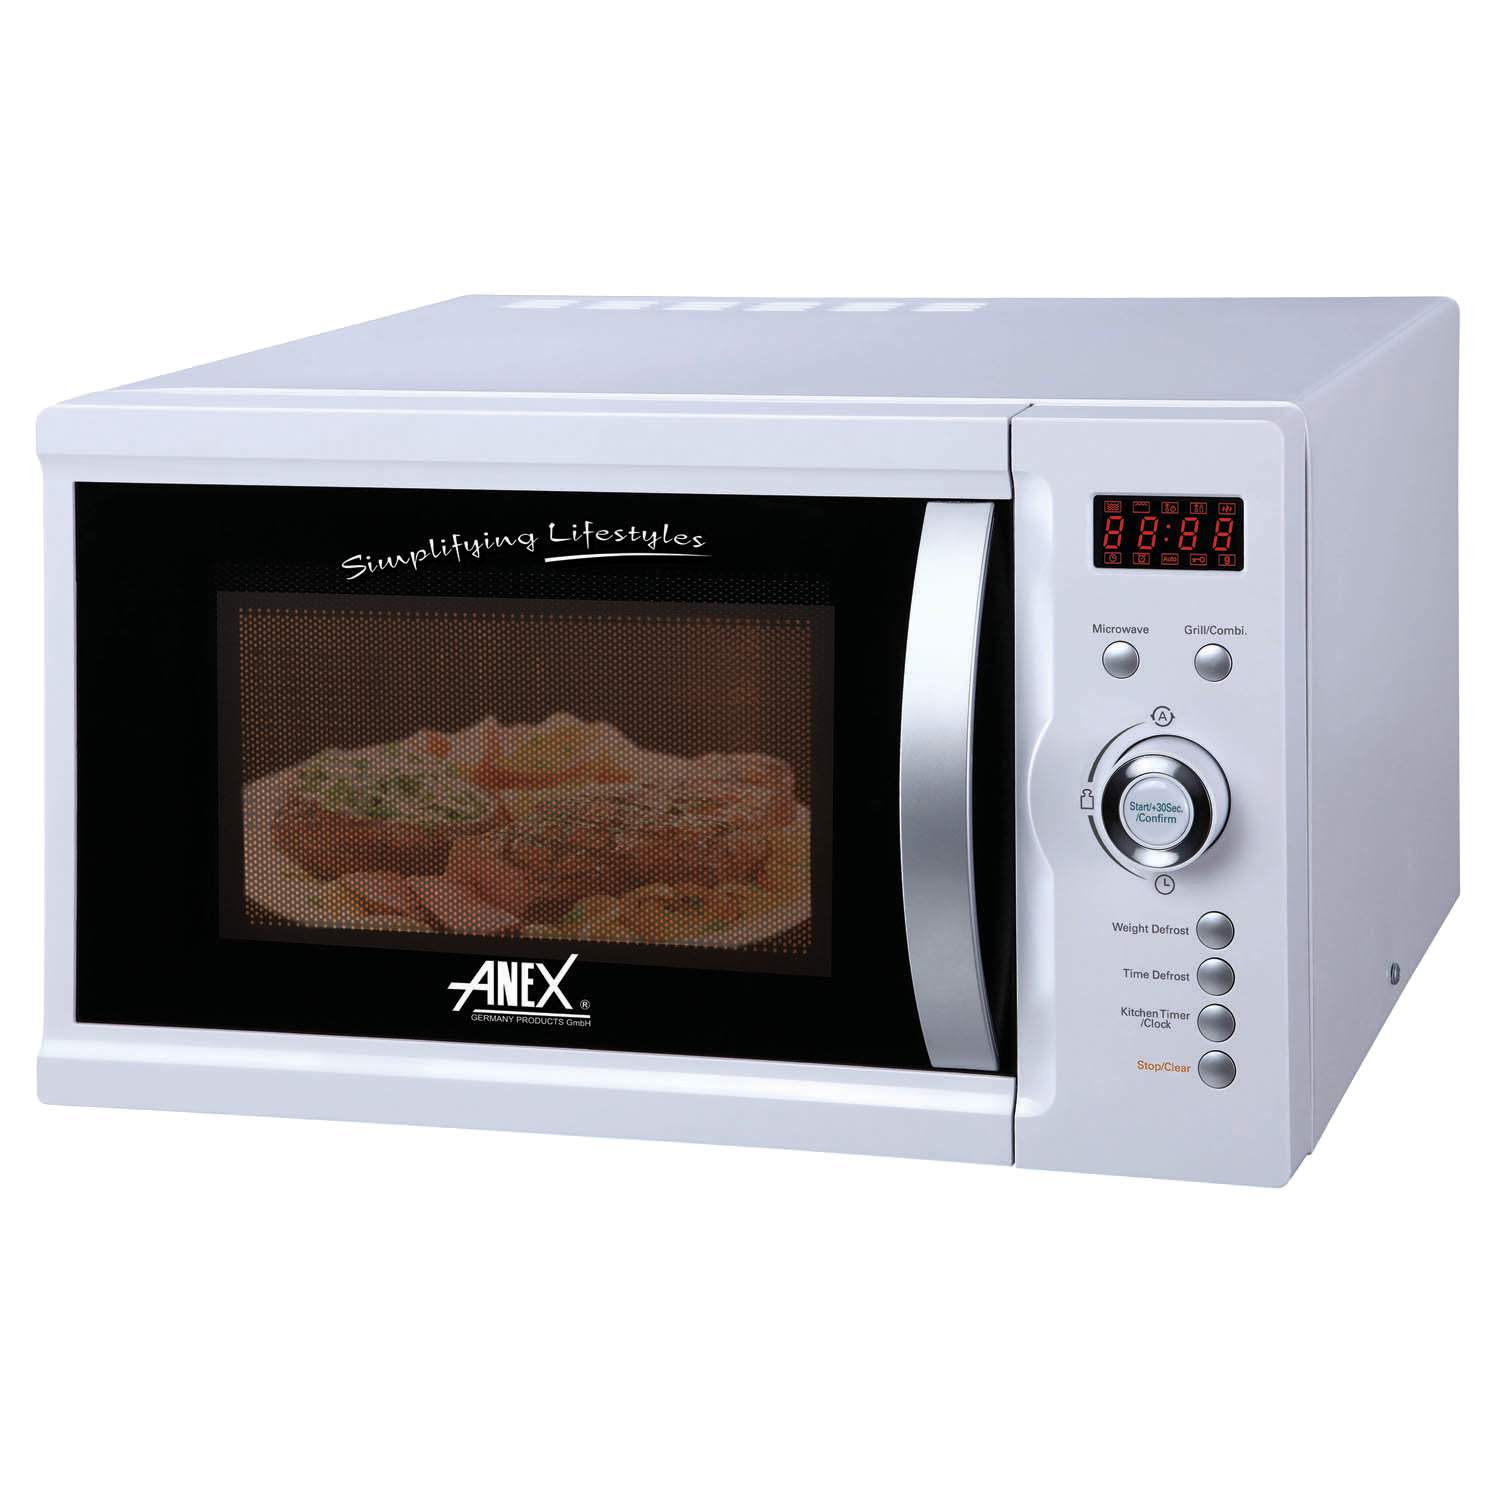 Gambar png oven microwave